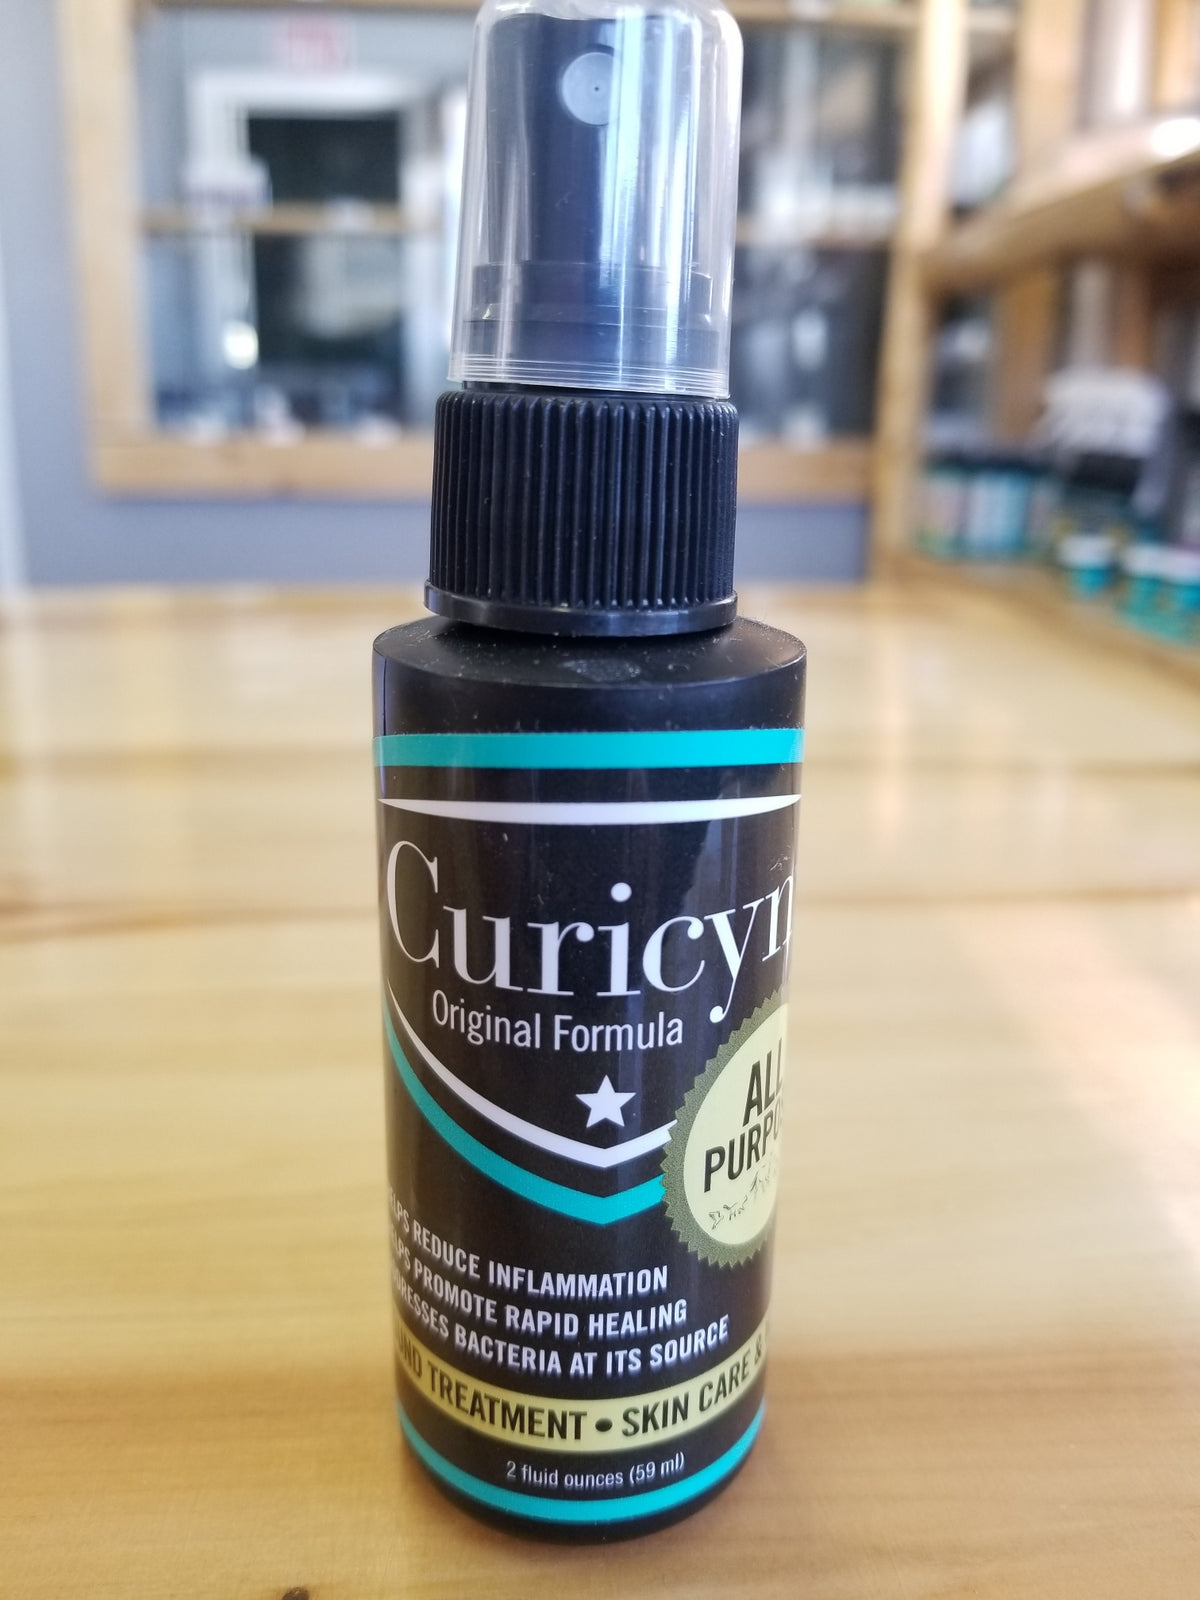 Curicyn wound care 2 oz | The Sturdy Horse